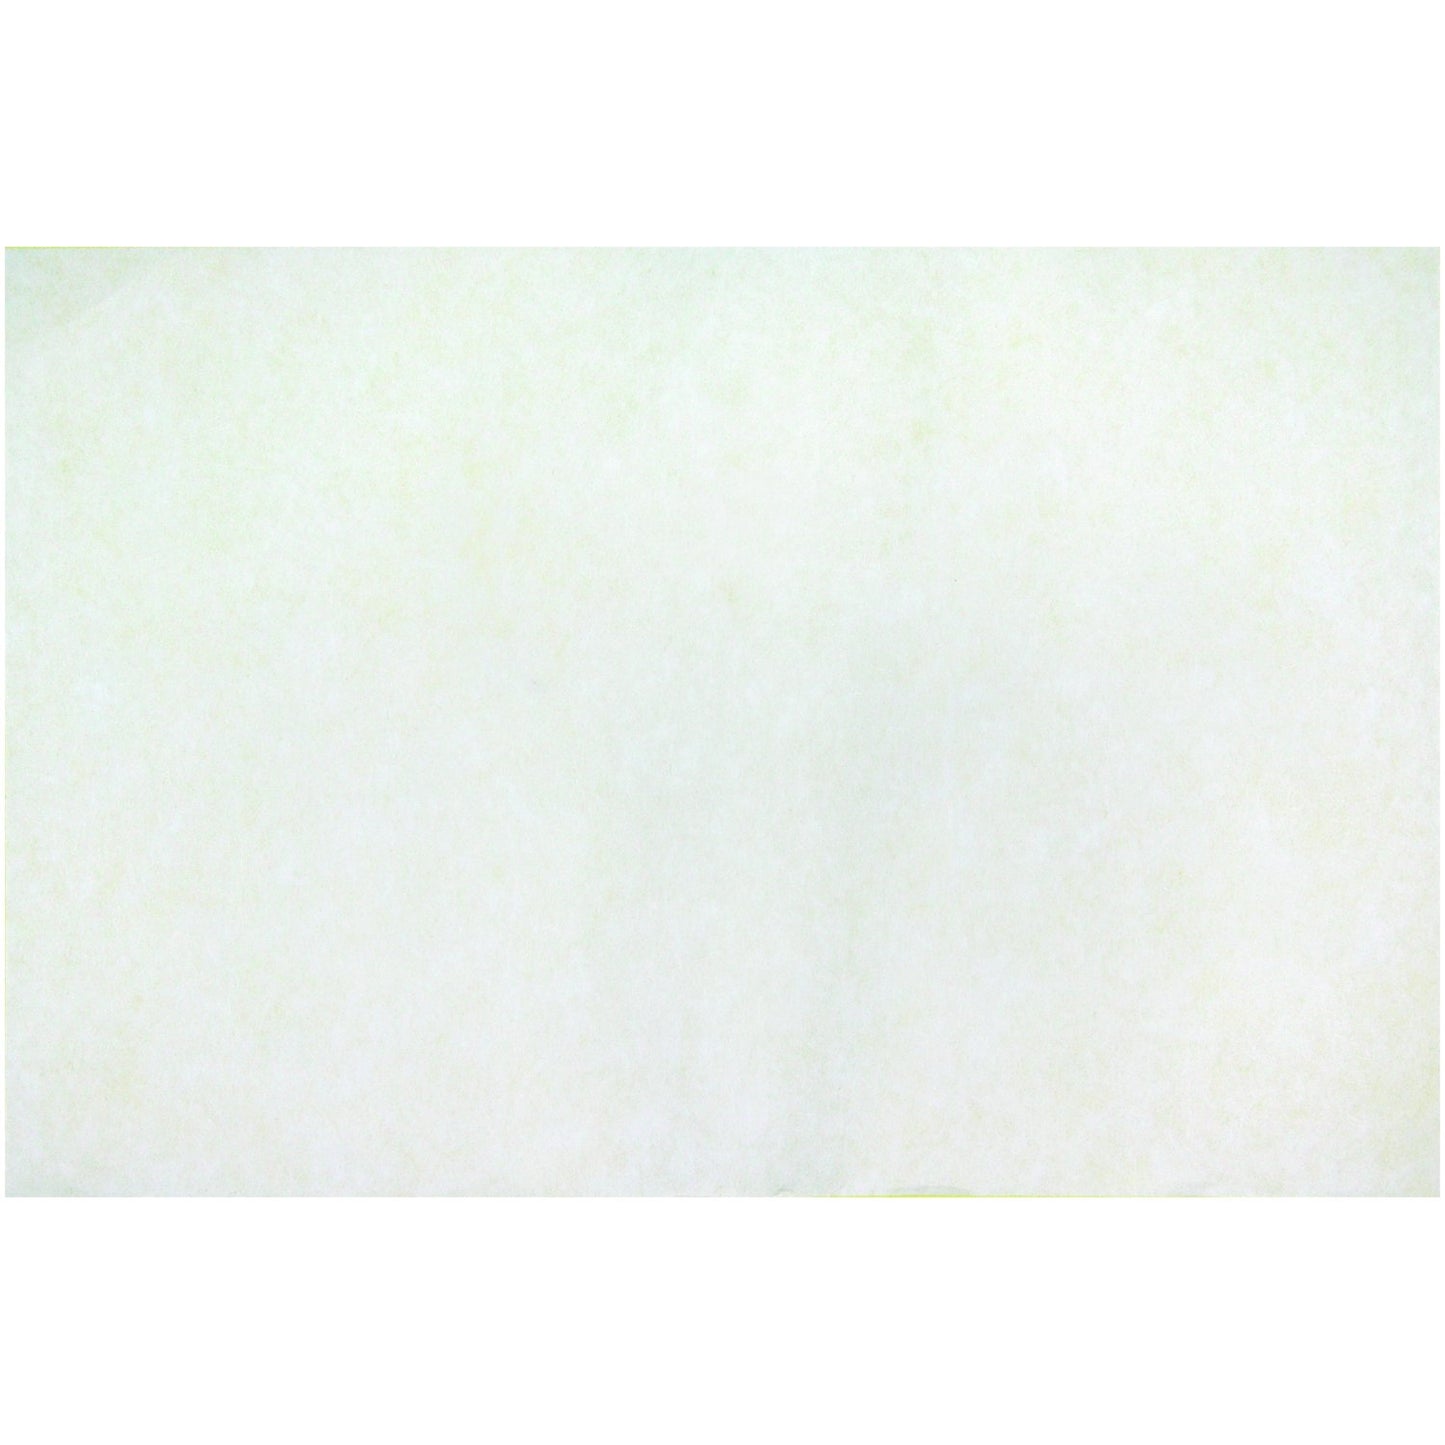 Roylco White Color Diffusing Paper - 12 x 18 inches #R15212, Pack of 50